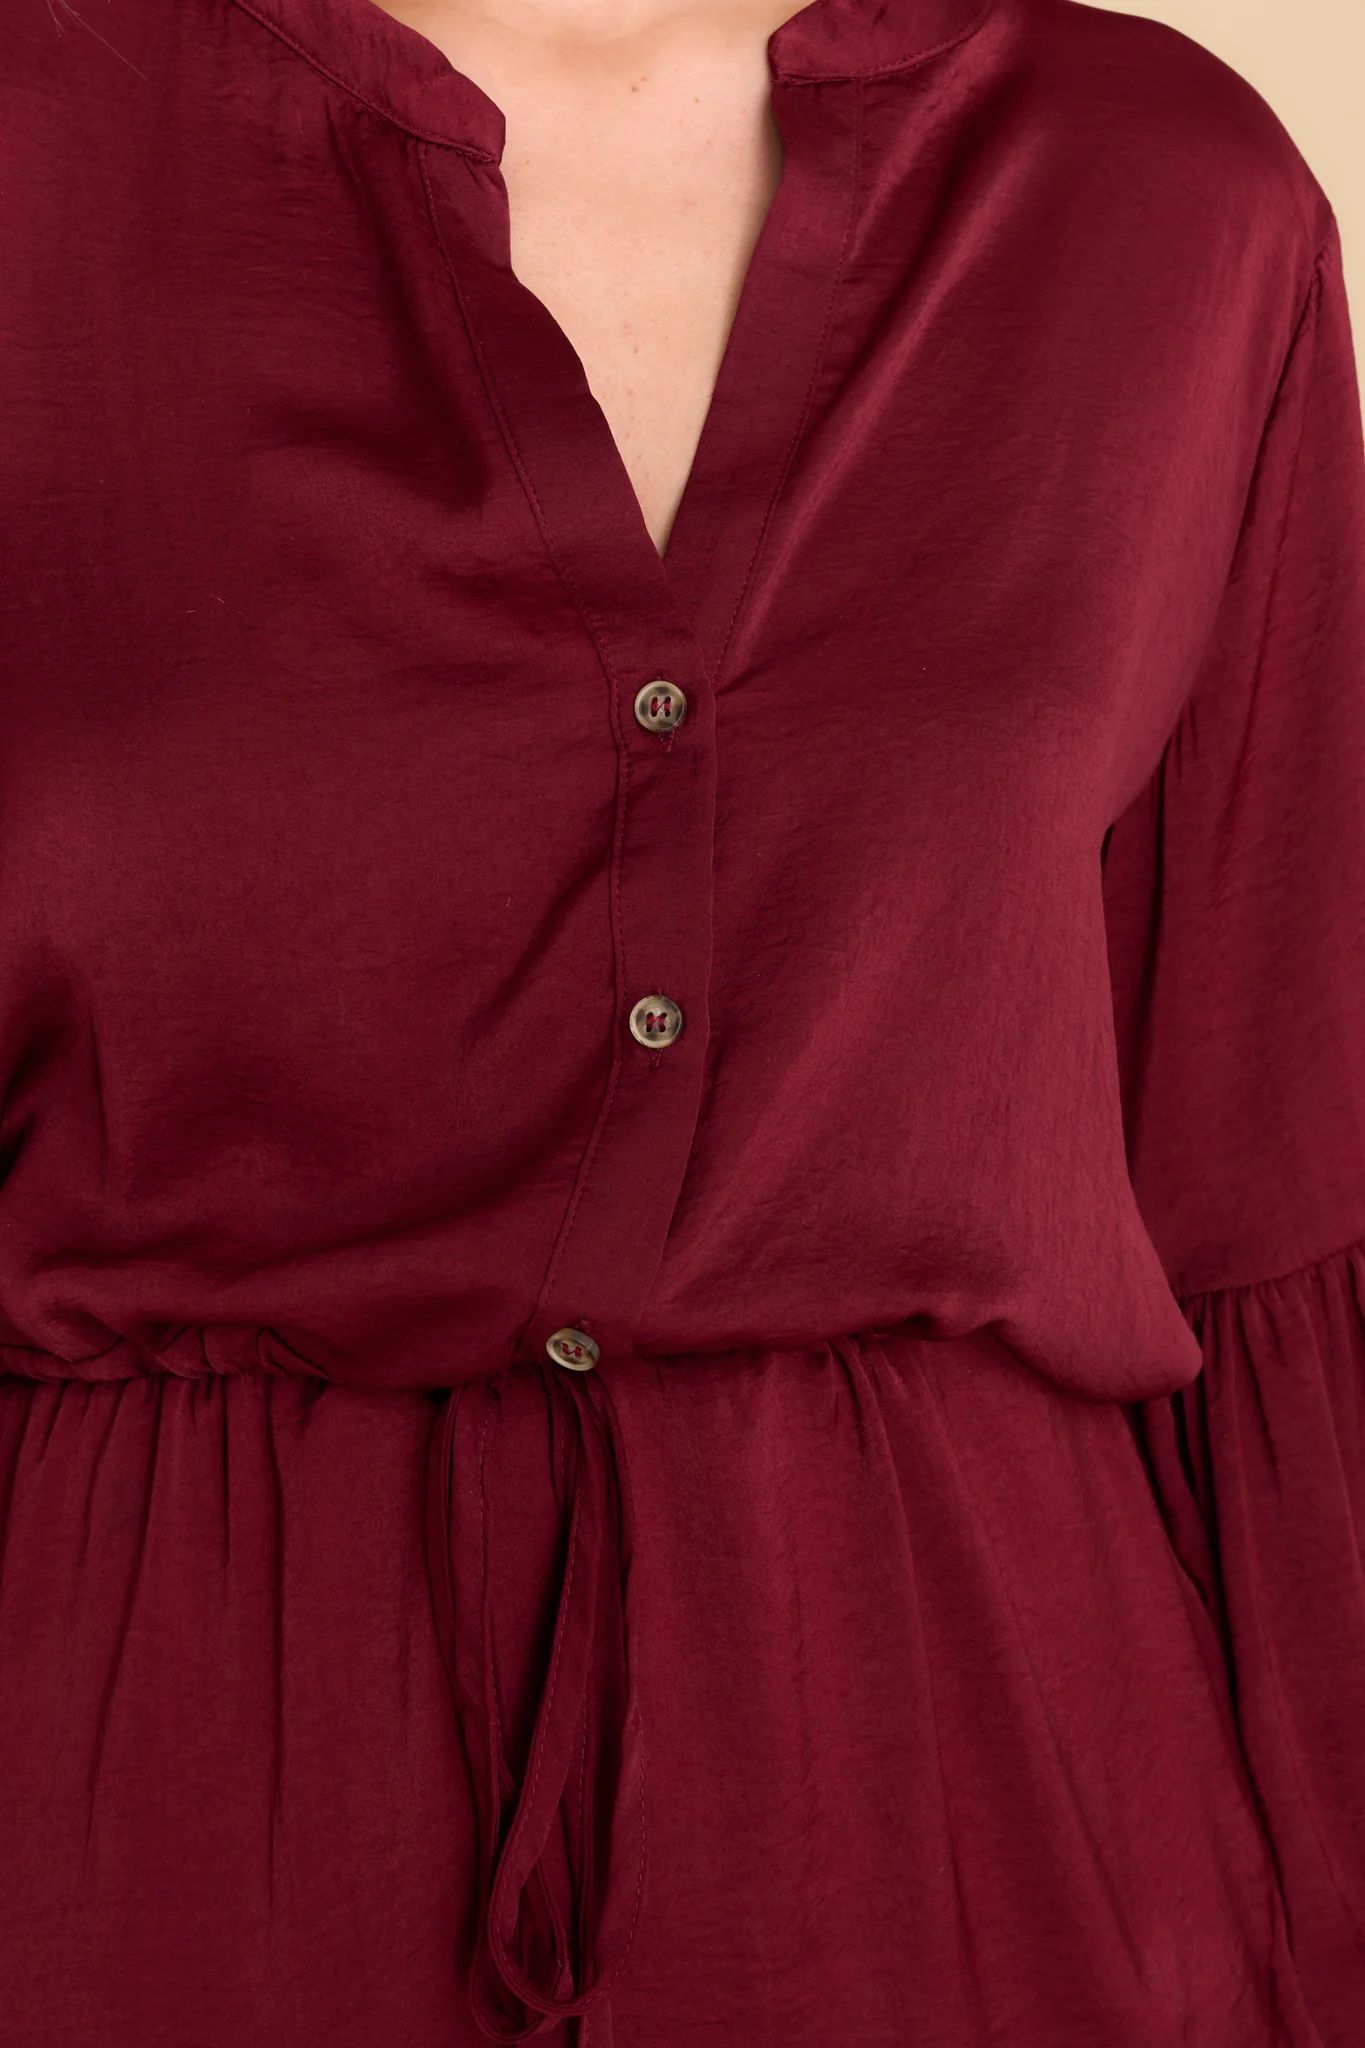 Moment Of Truth Burgundy Dress | Red Dress 